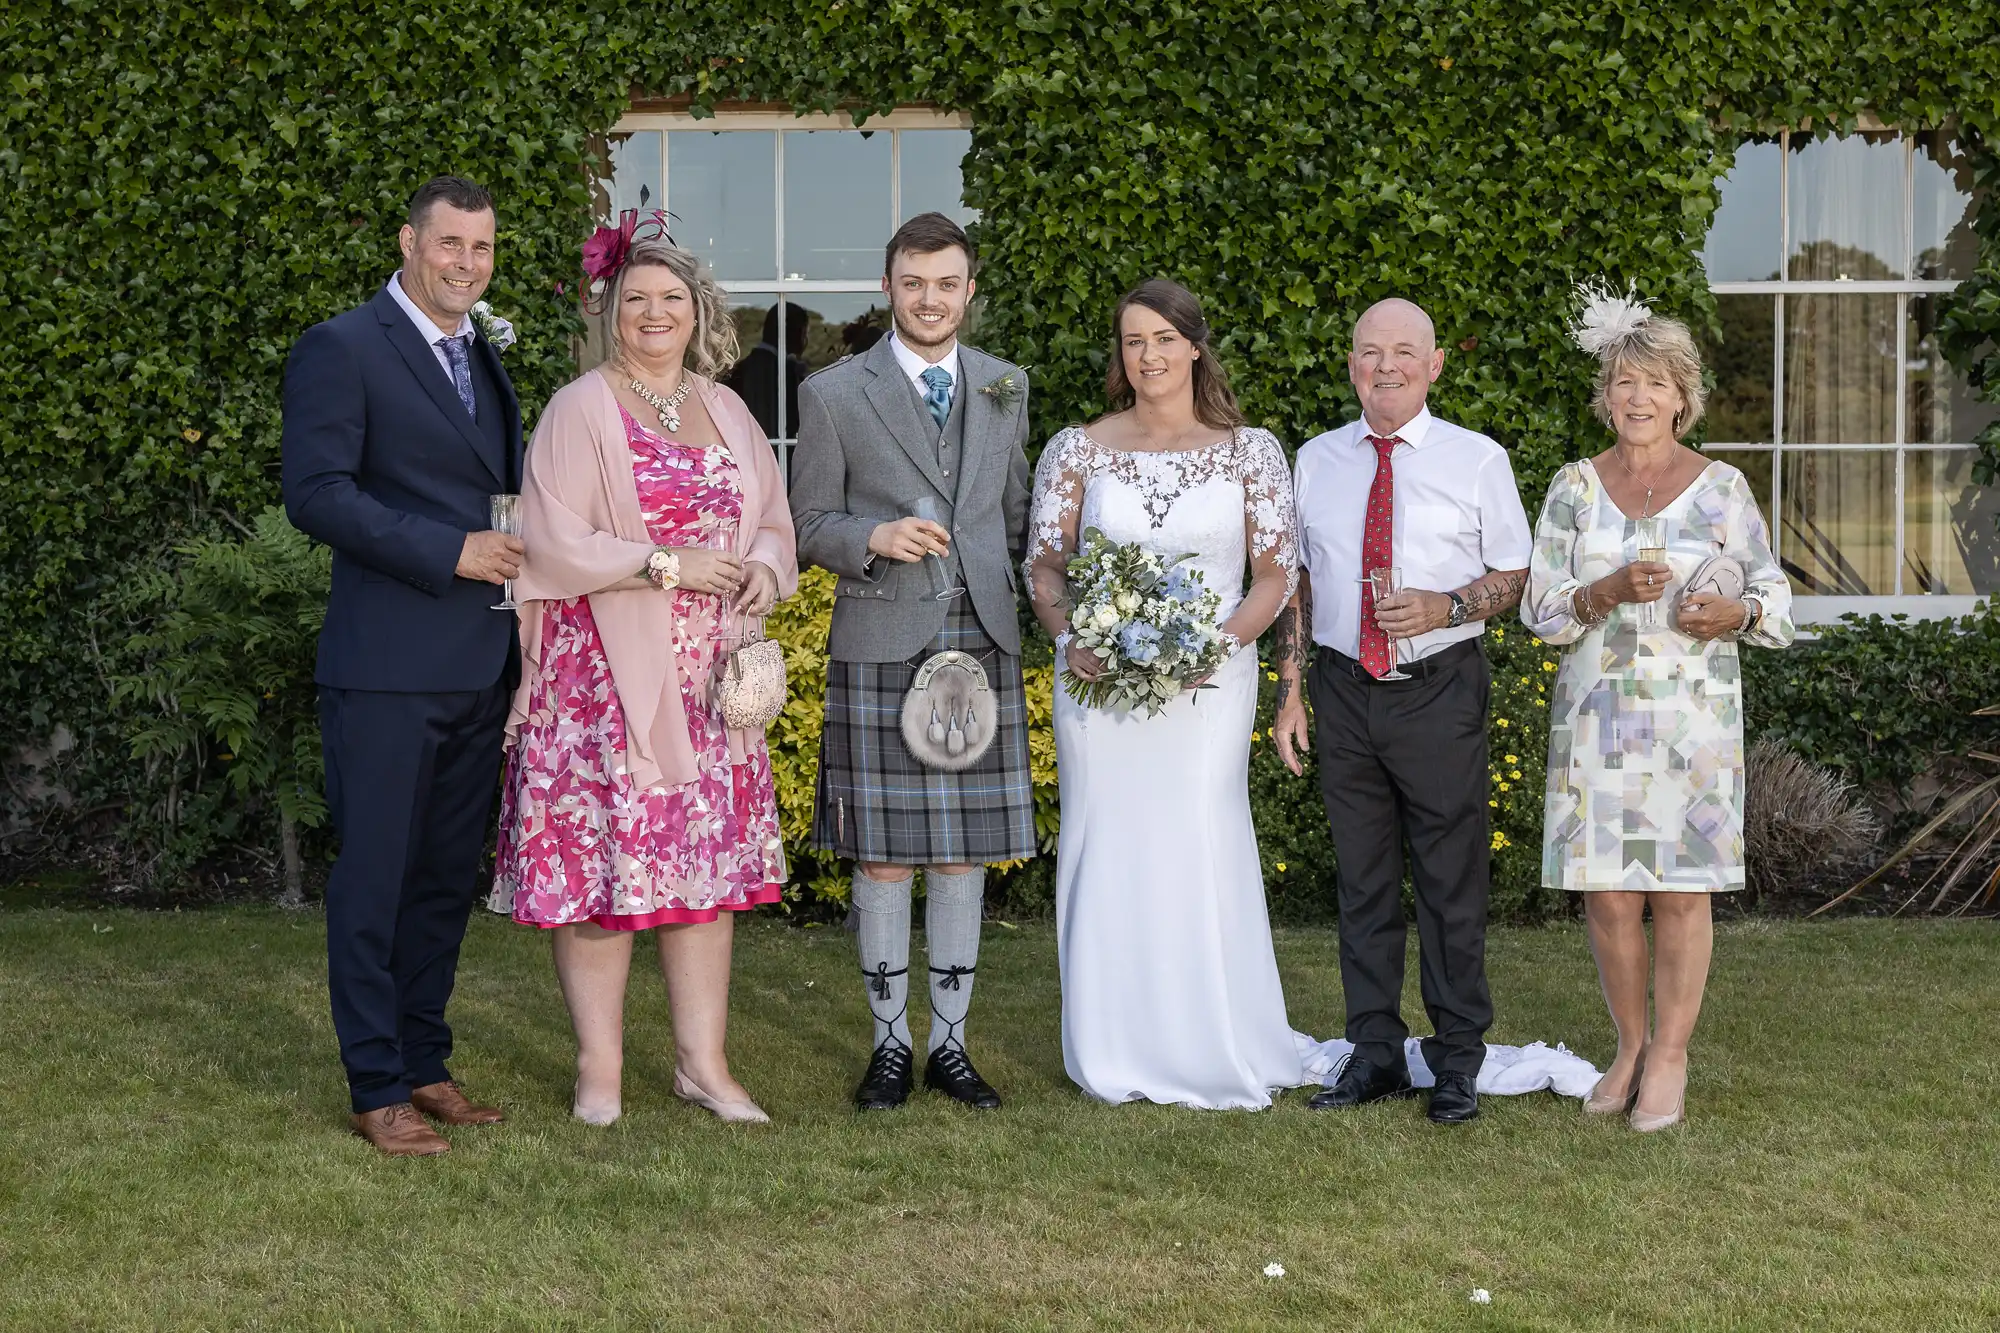 A wedding group with six people posing on a lawn; the groom is in a kilt, and the bride is in a white dress.